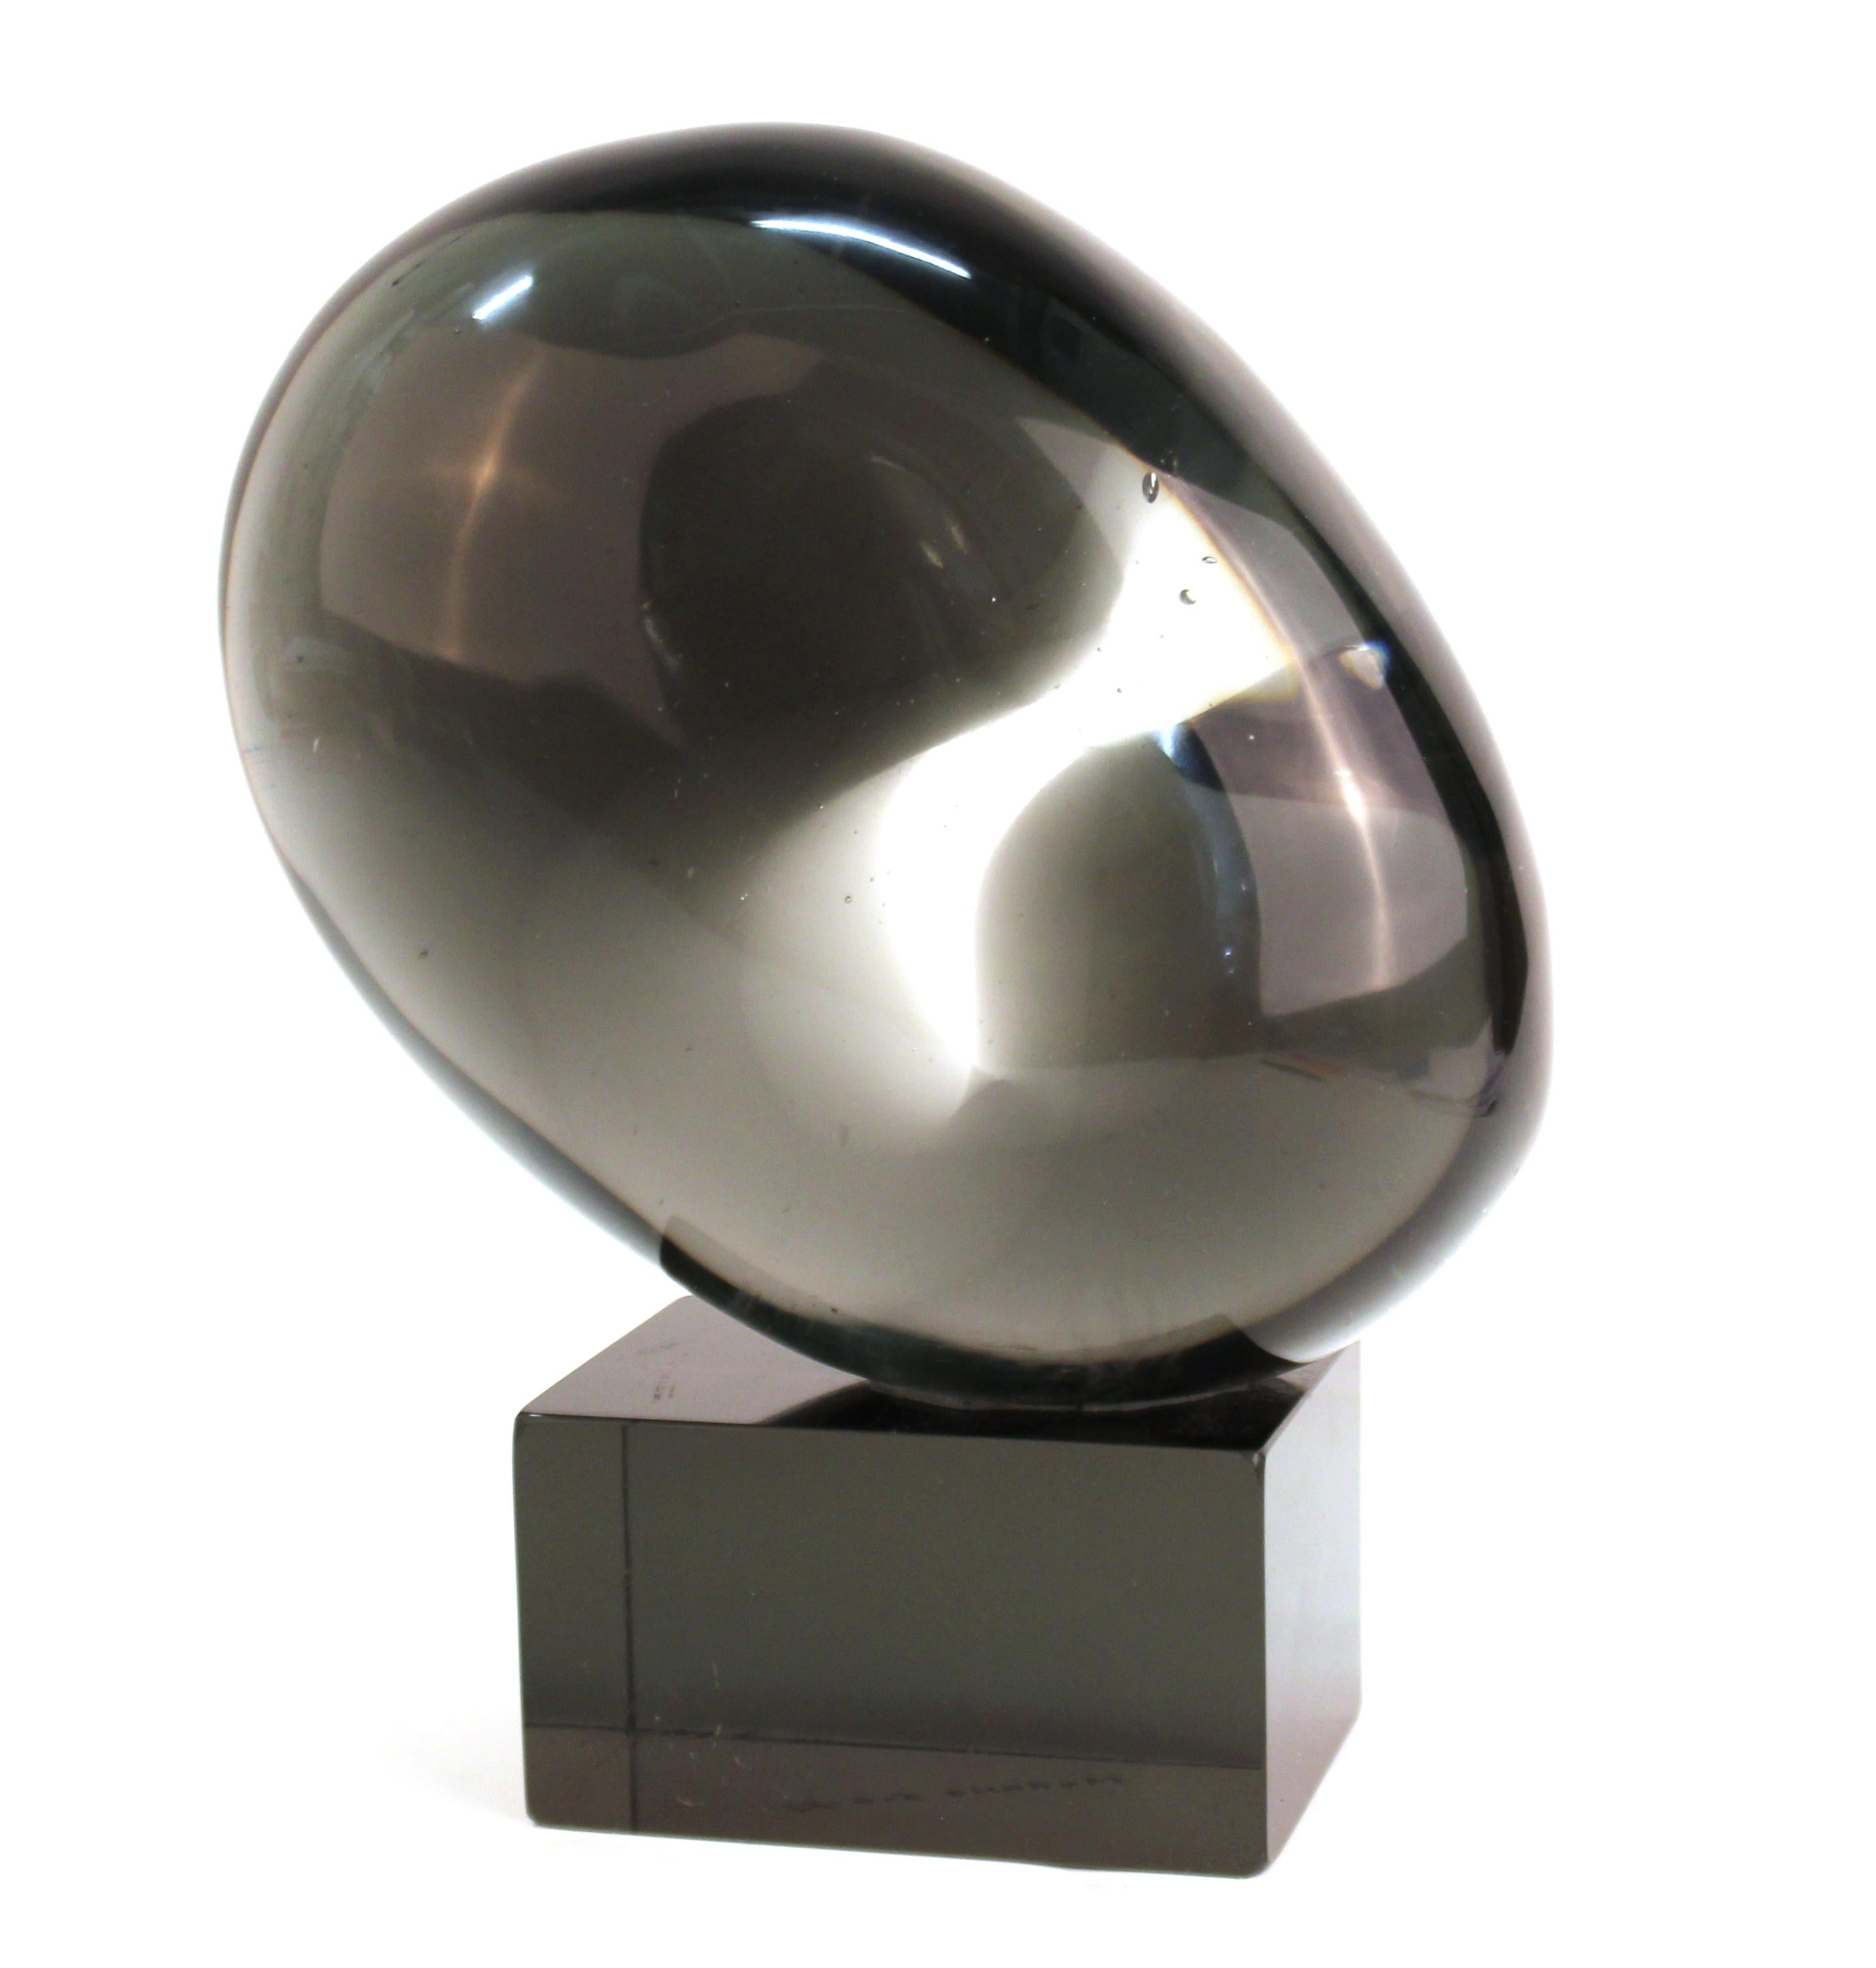 Italian modern abstract Murano glass egg sculpture atop dark glass base. The piece is signed by Livio Seguso on the back side and has the date and location etched on the bottom 